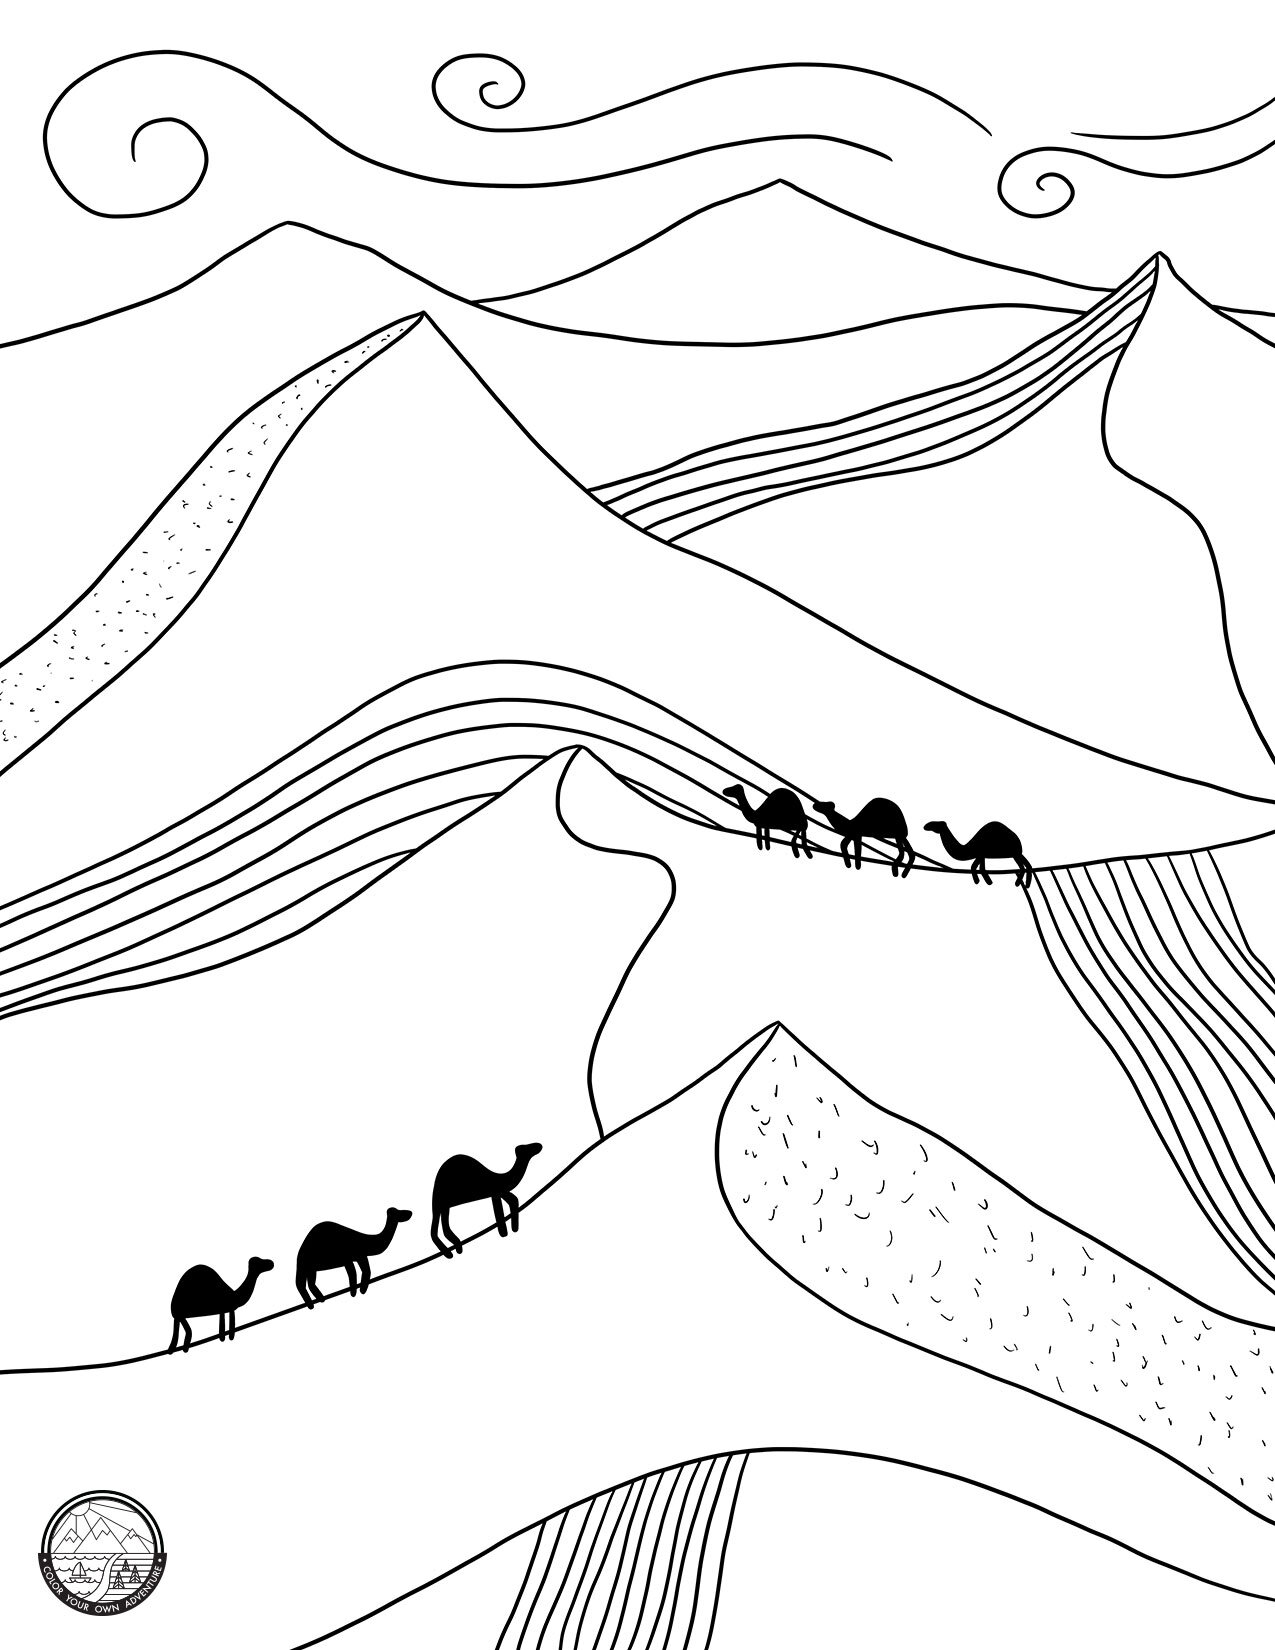 Camels Coloring Page